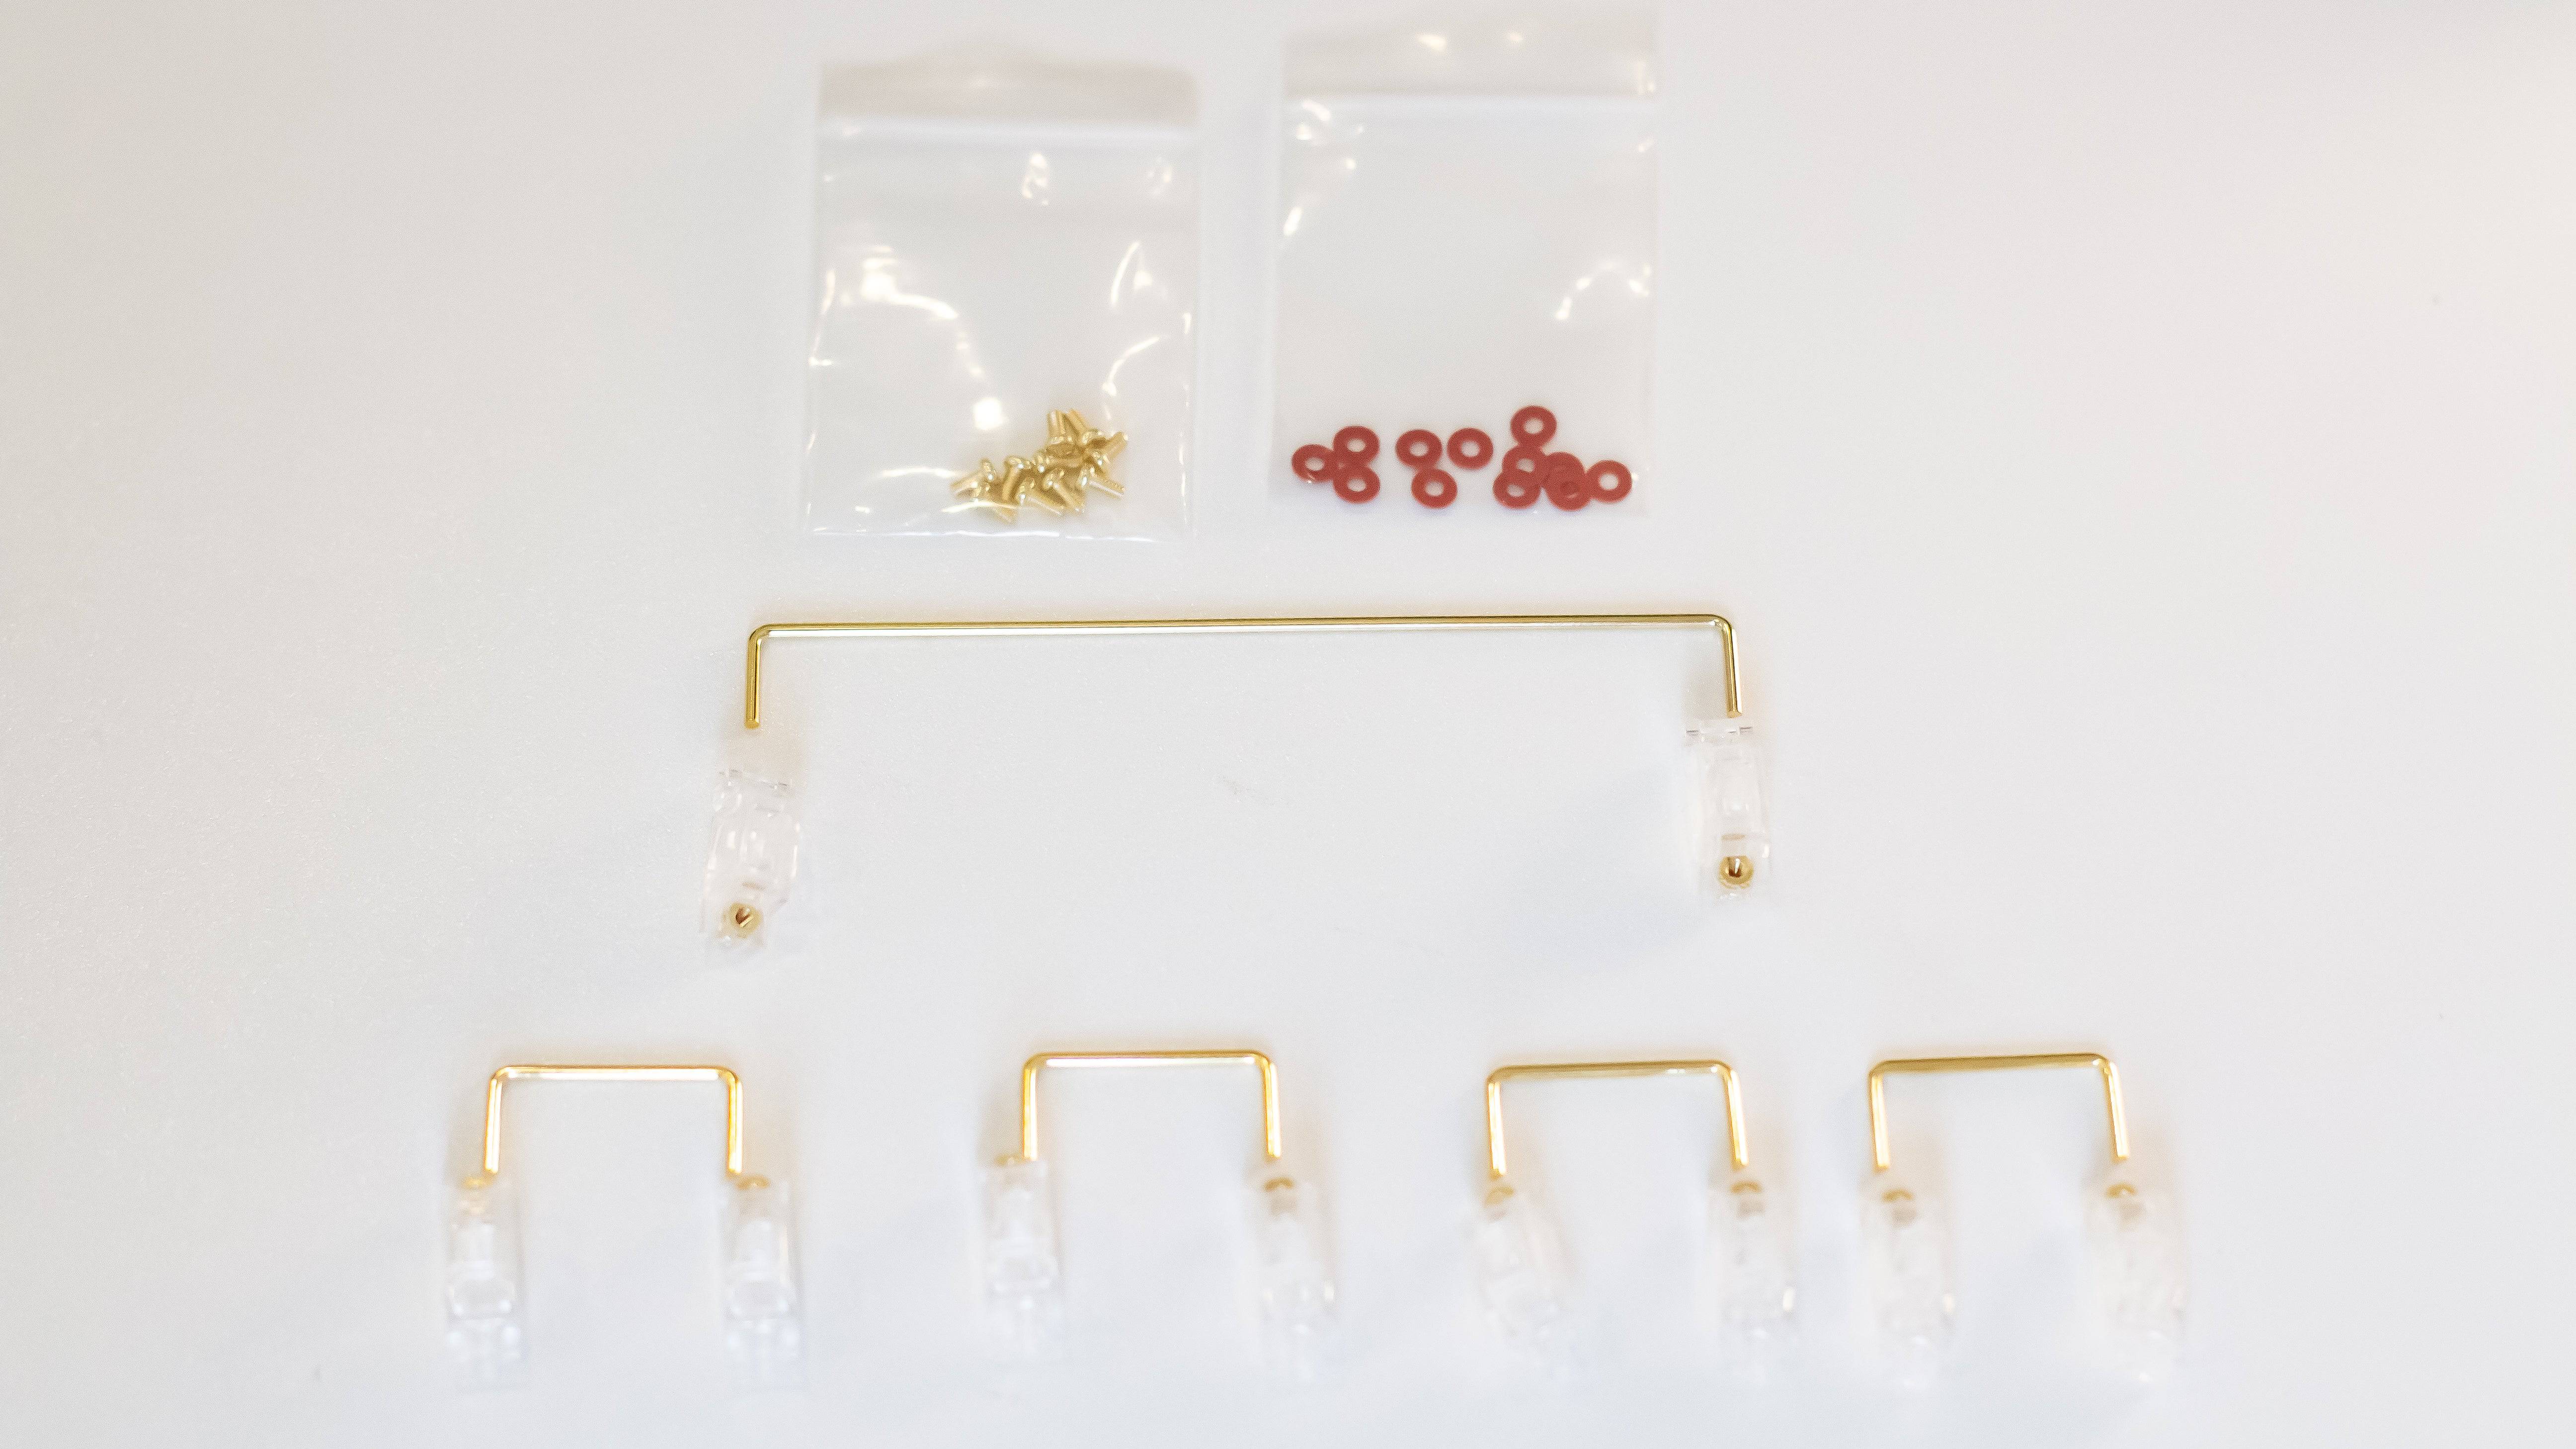 Clear Durock V2 stabilizers with gold wires, gold screws, and red screw dampener pads for DIY mechanical keyboards..